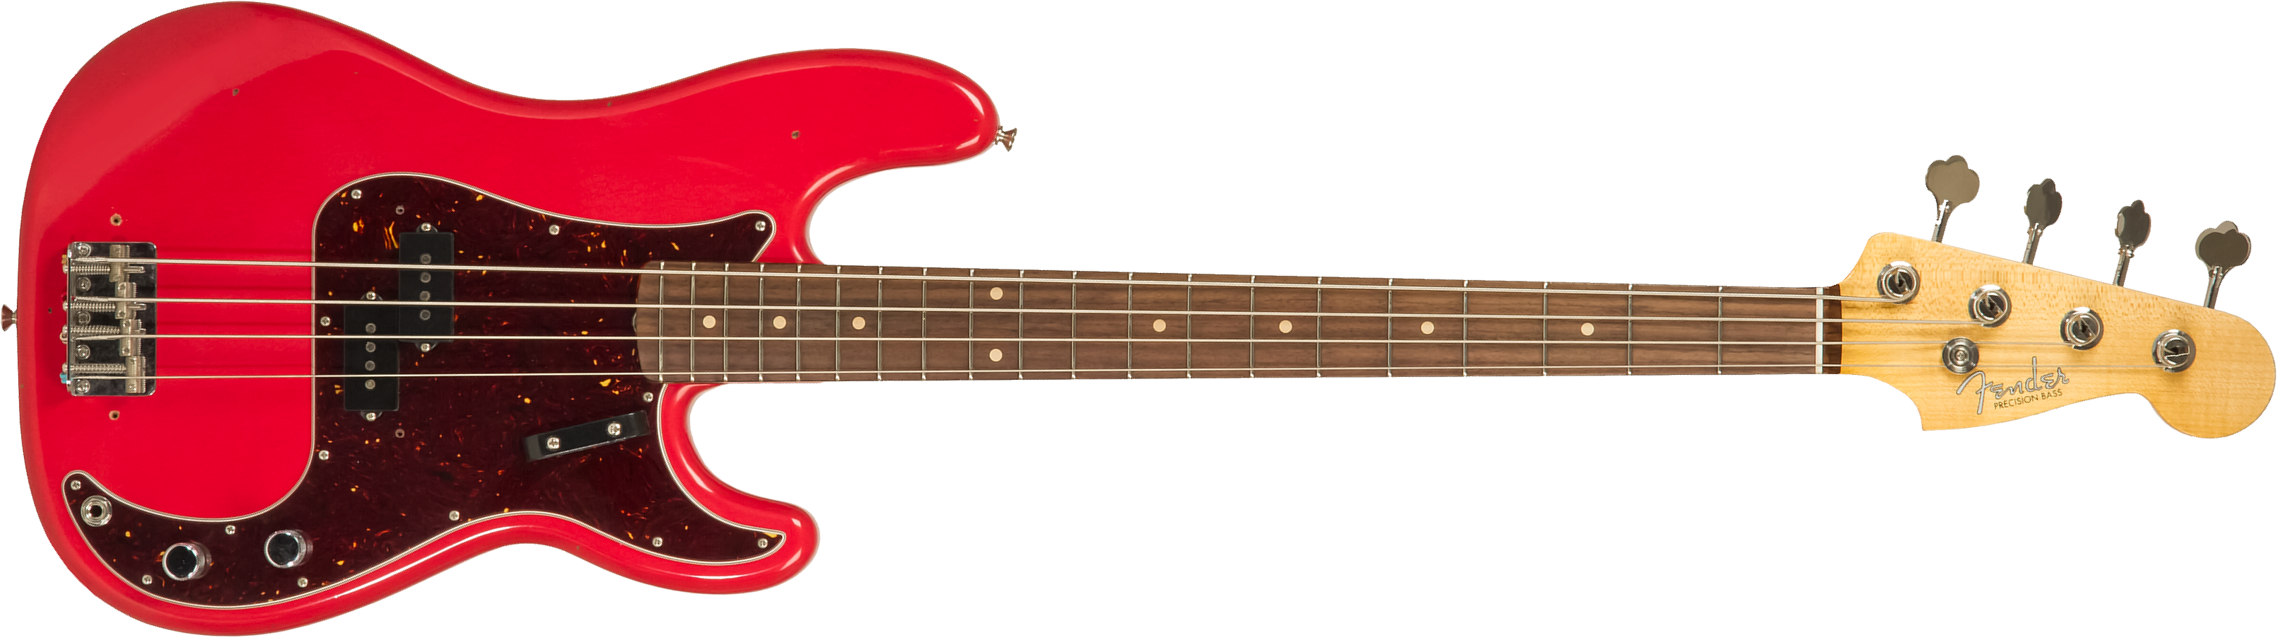 Fender Custom Shop Precision Bass 1962 Rw #r126357 - Journeyman Relic Fiesta Red - Solid body electric bass - Main picture